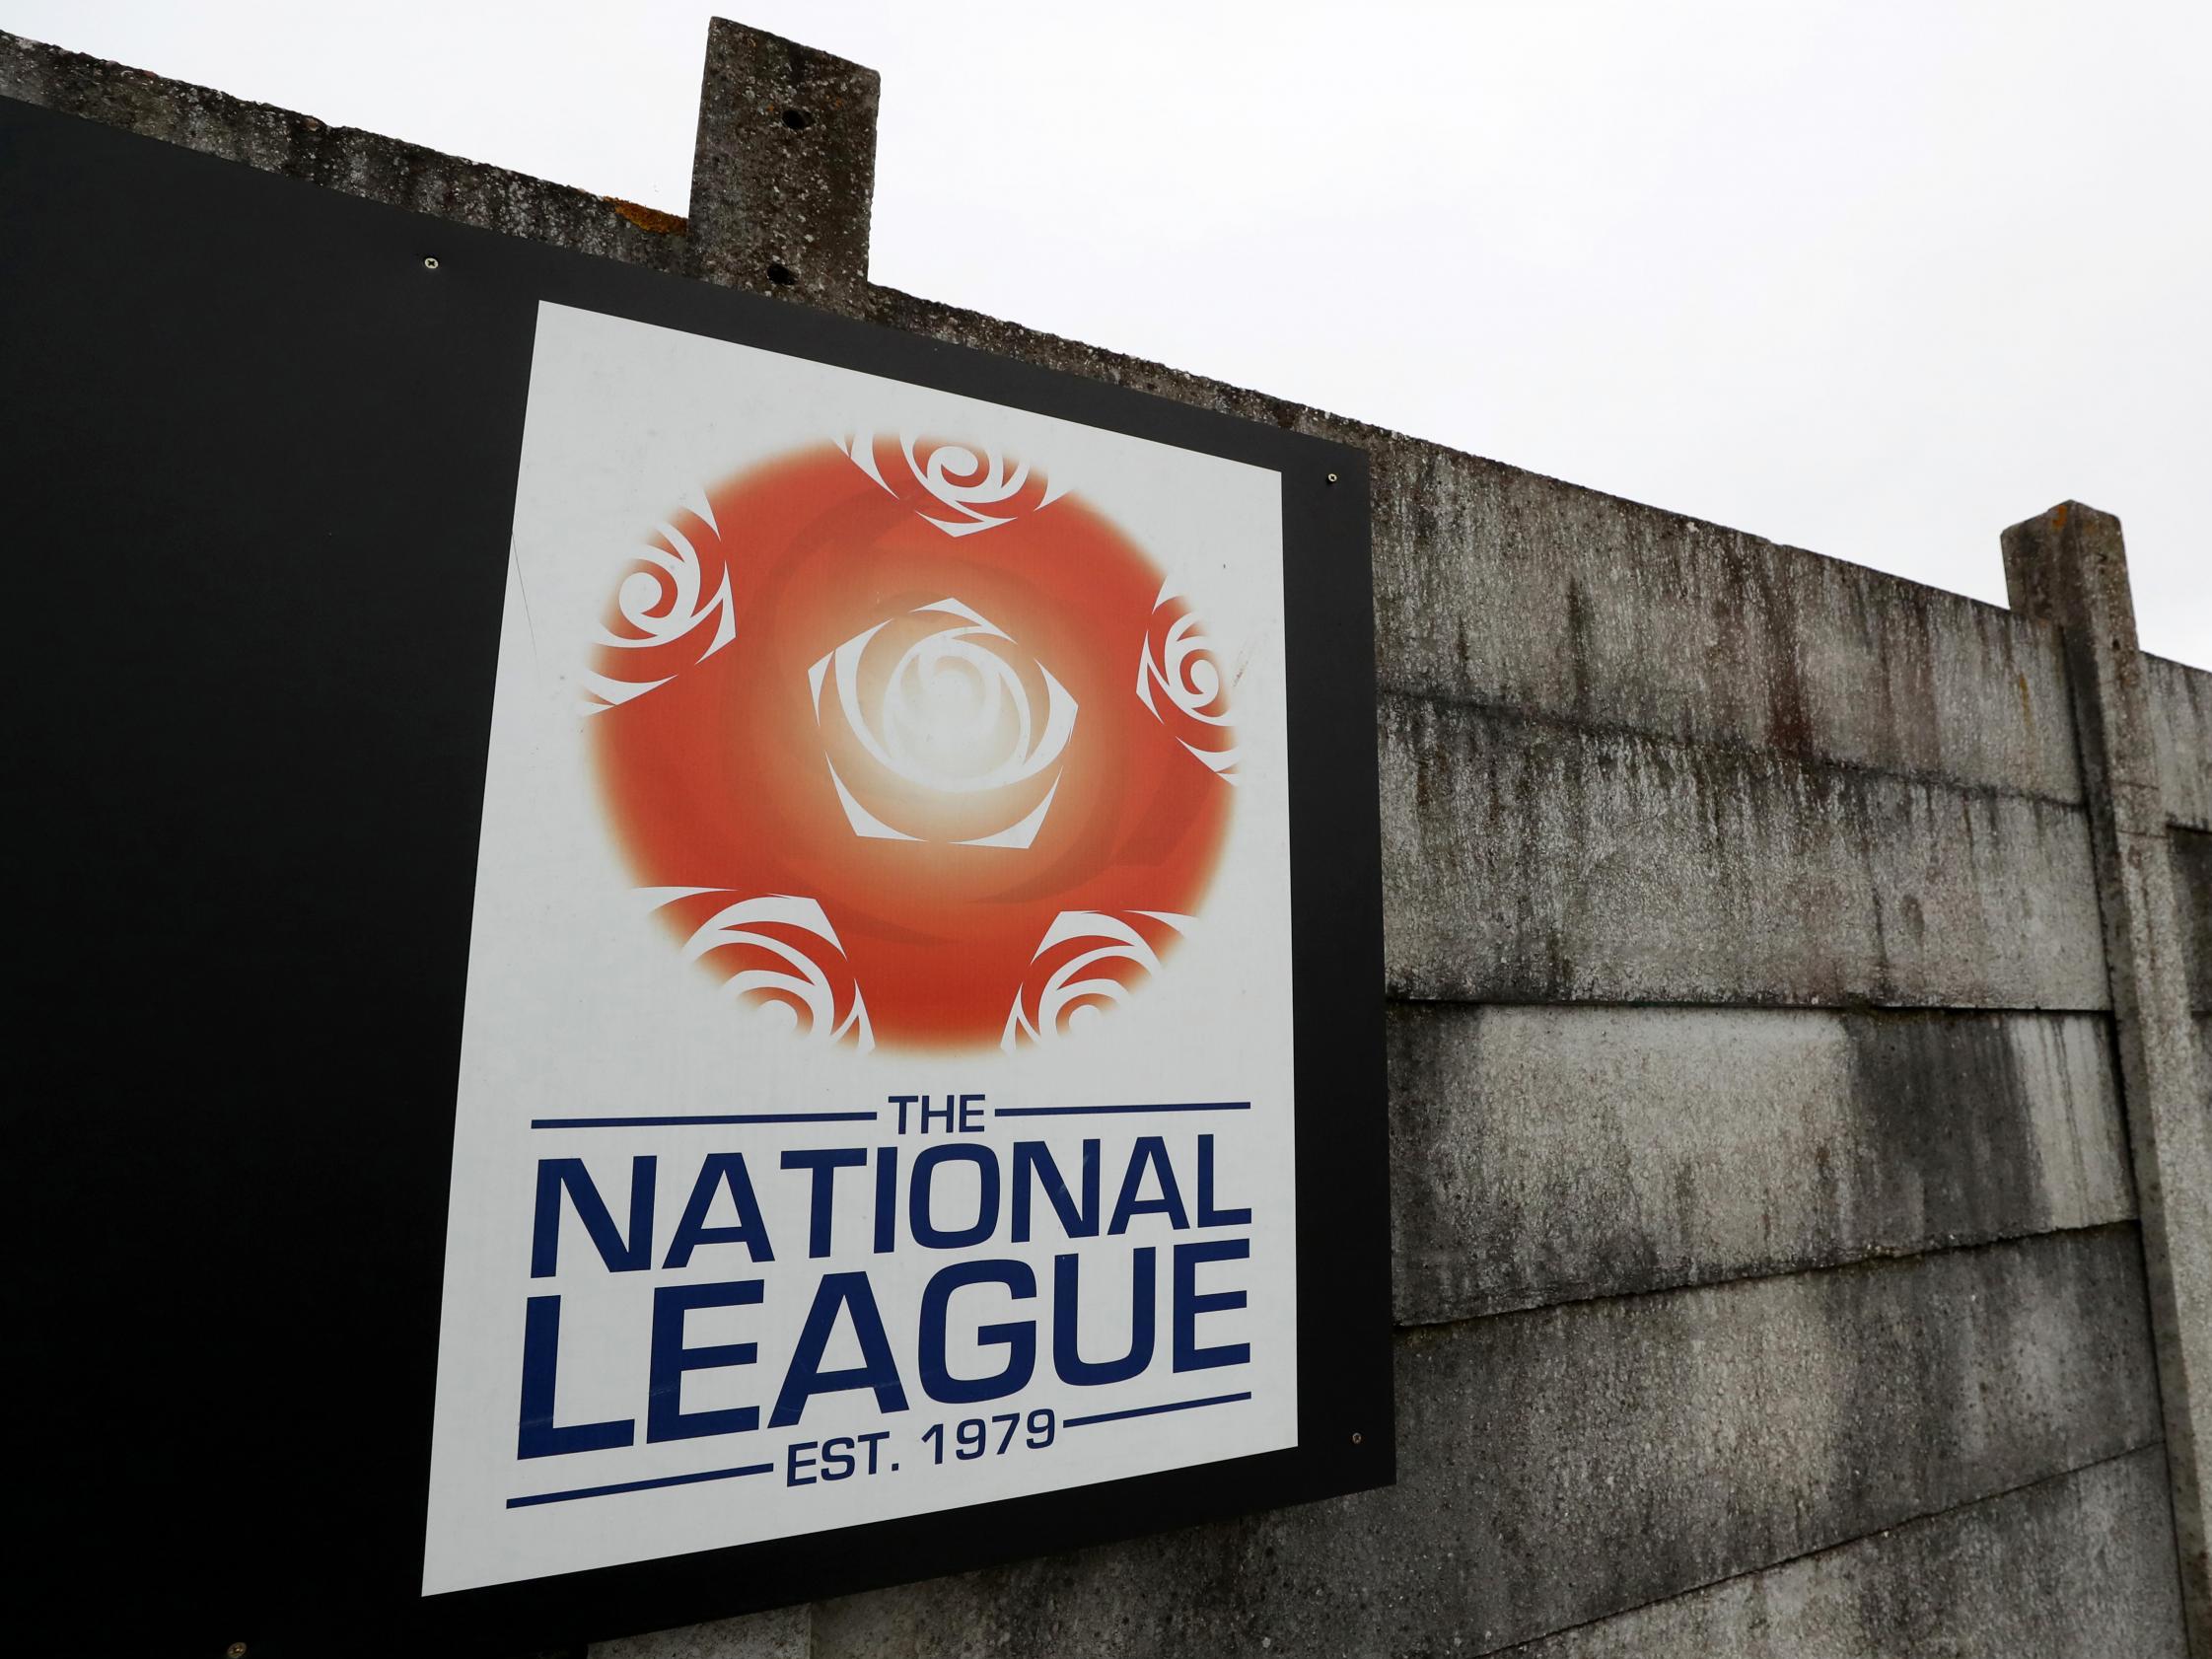 The FA have confirmed the season is over for all leagues beneath the National League